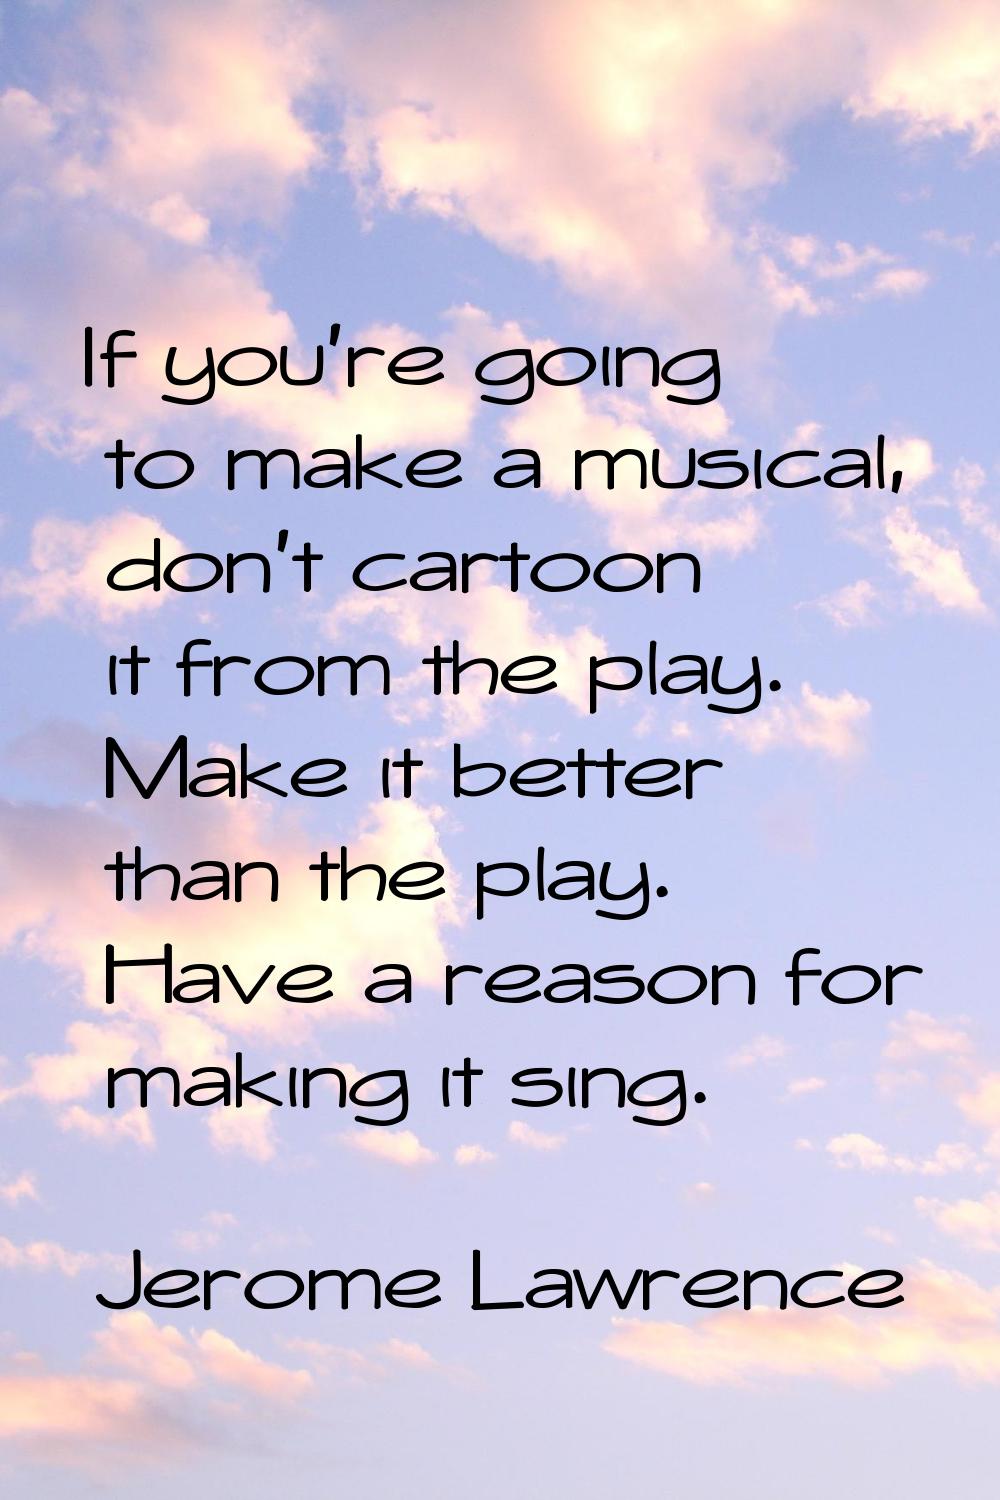 If you're going to make a musical, don't cartoon it from the play. Make it better than the play. Ha